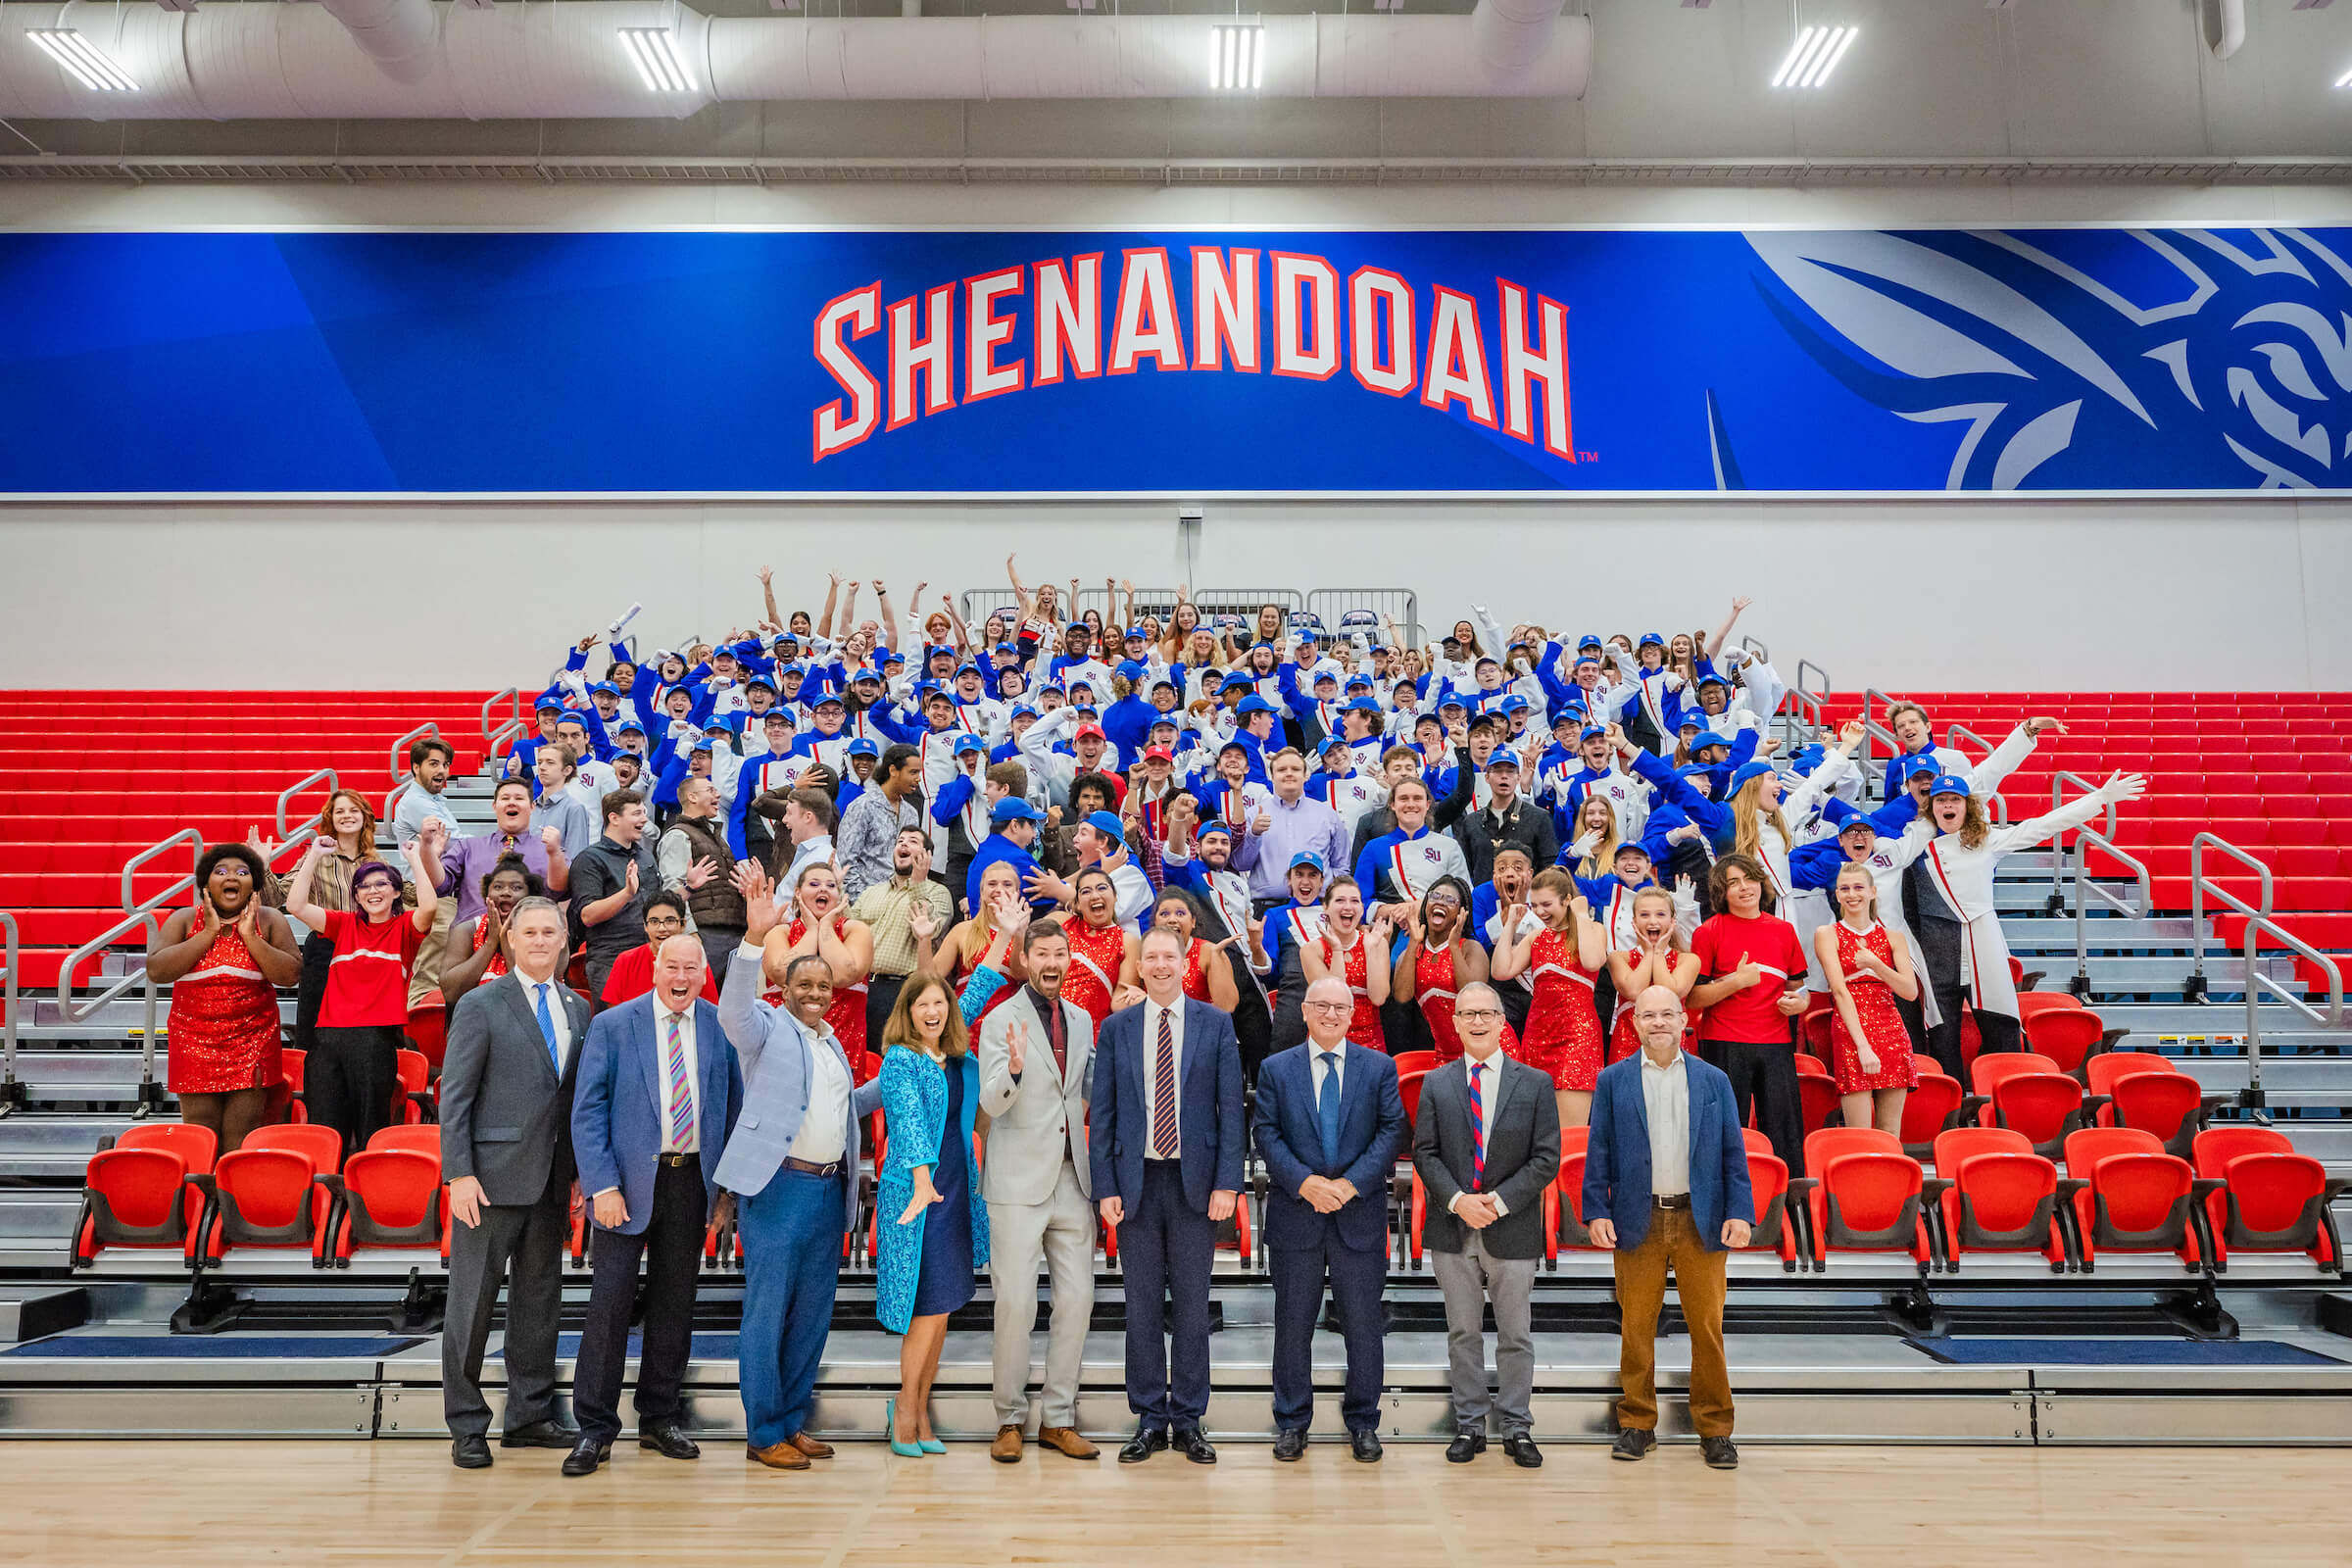 Shenandoah University Marching Band, cheerleaders, Studio Big Band, representatives from Shenandoah University, and organizers of London's New Year's Day Parade pose for a group photo in the Wilkins Athletics & Events Center